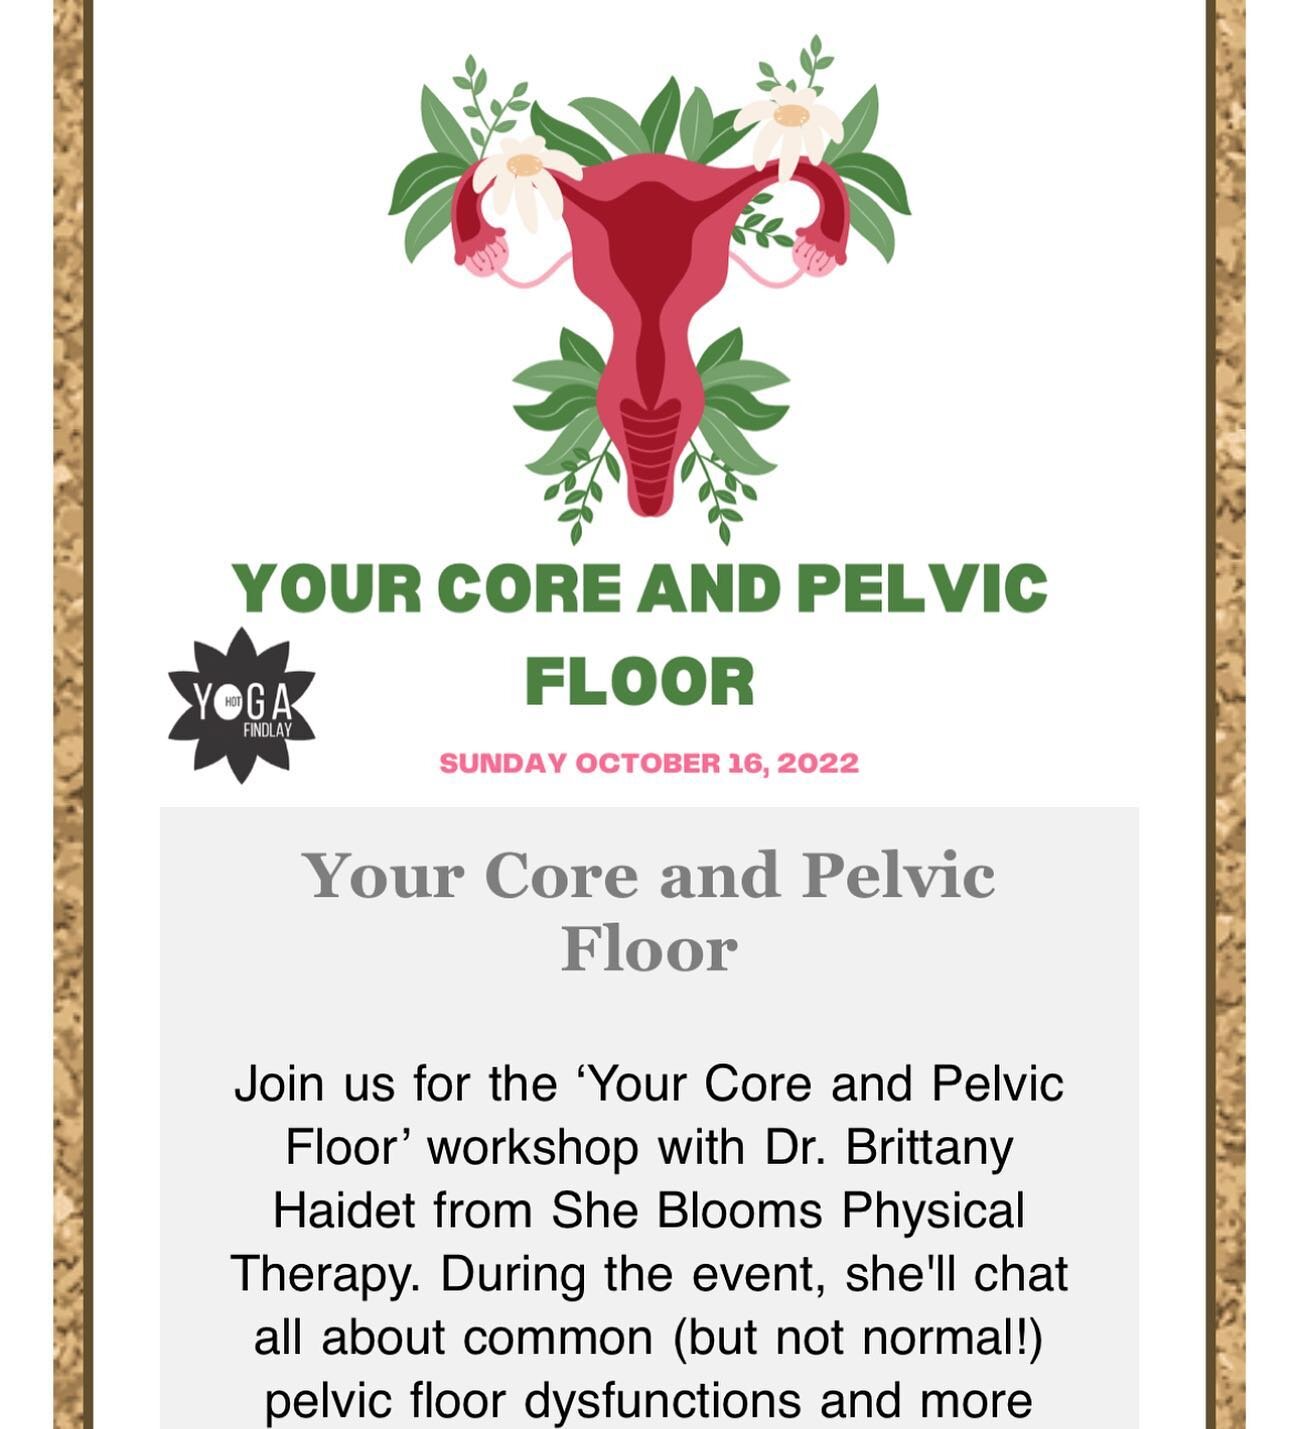 Join me at the wonderful @hotyogafindlay for my &lsquo;Your Core and Pelvic Floor&rsquo; workshop. During the event, I&rsquo;ll chat all about common (but not normal!) pelvic floor dysfunctions and more specifically:
- Anatomy of the pelvic floor and